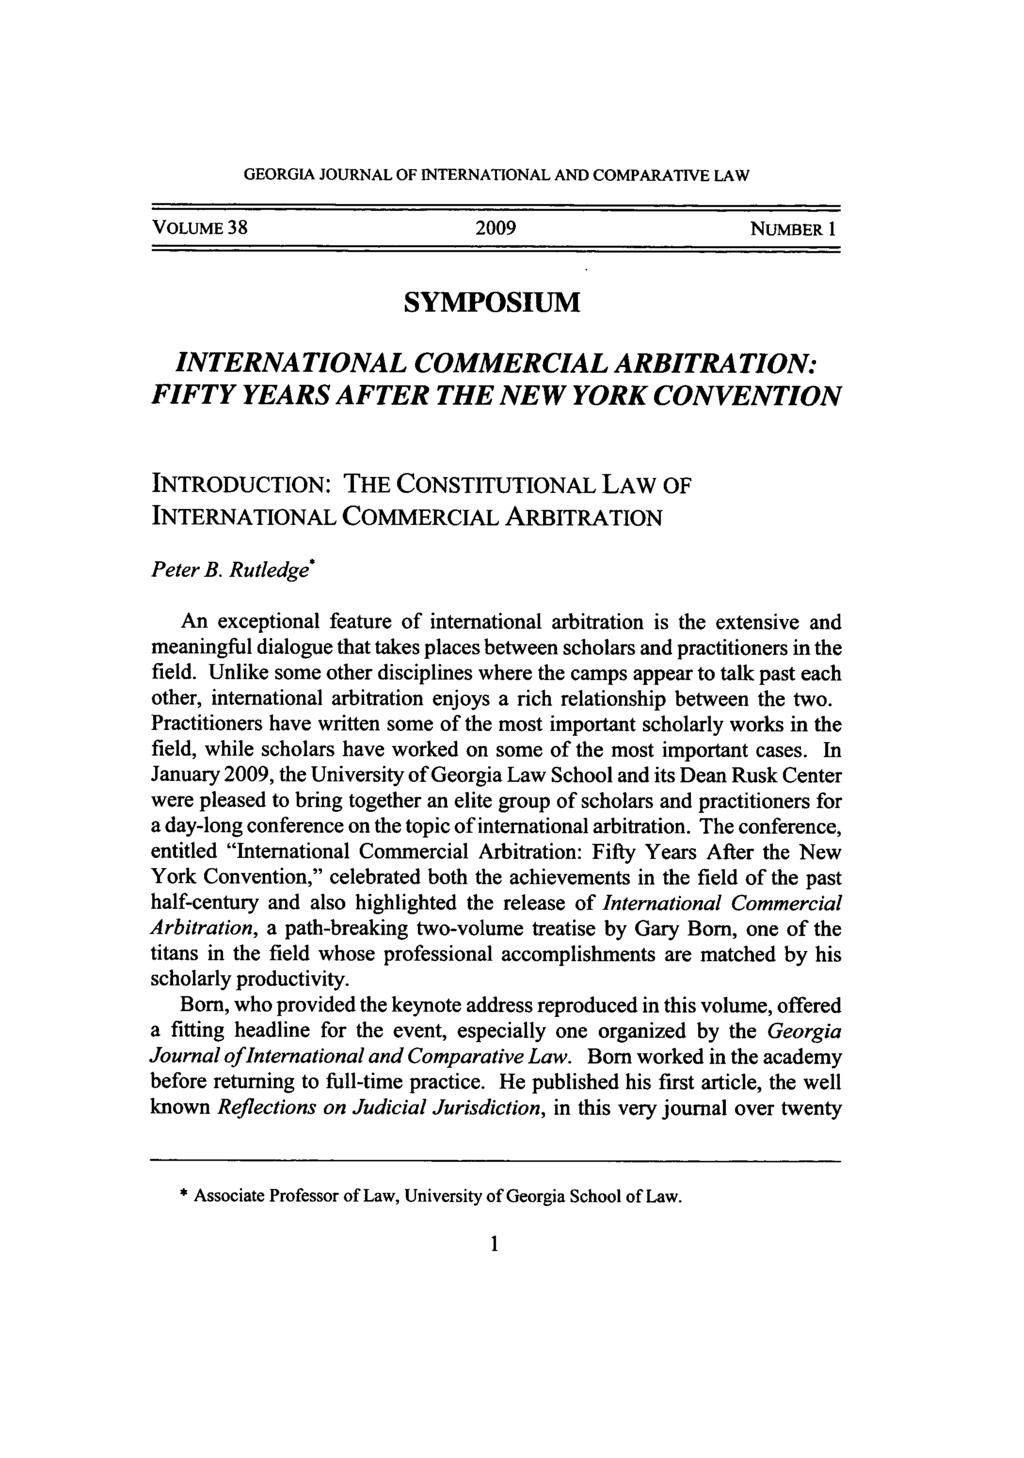 GEORGIA JOURNAL OF INTERNATIONAL AND COMPARATIVE LAW VOLUME 38 2009 NUMBER 1 SYMPOSIUM INTERNATIONAL COMMERCIAL ARBITRATION: FIFTY YEARS AFTER THE NEW YORK CONVENTION INTRODUCTION: THE CONSTITUTIONAL